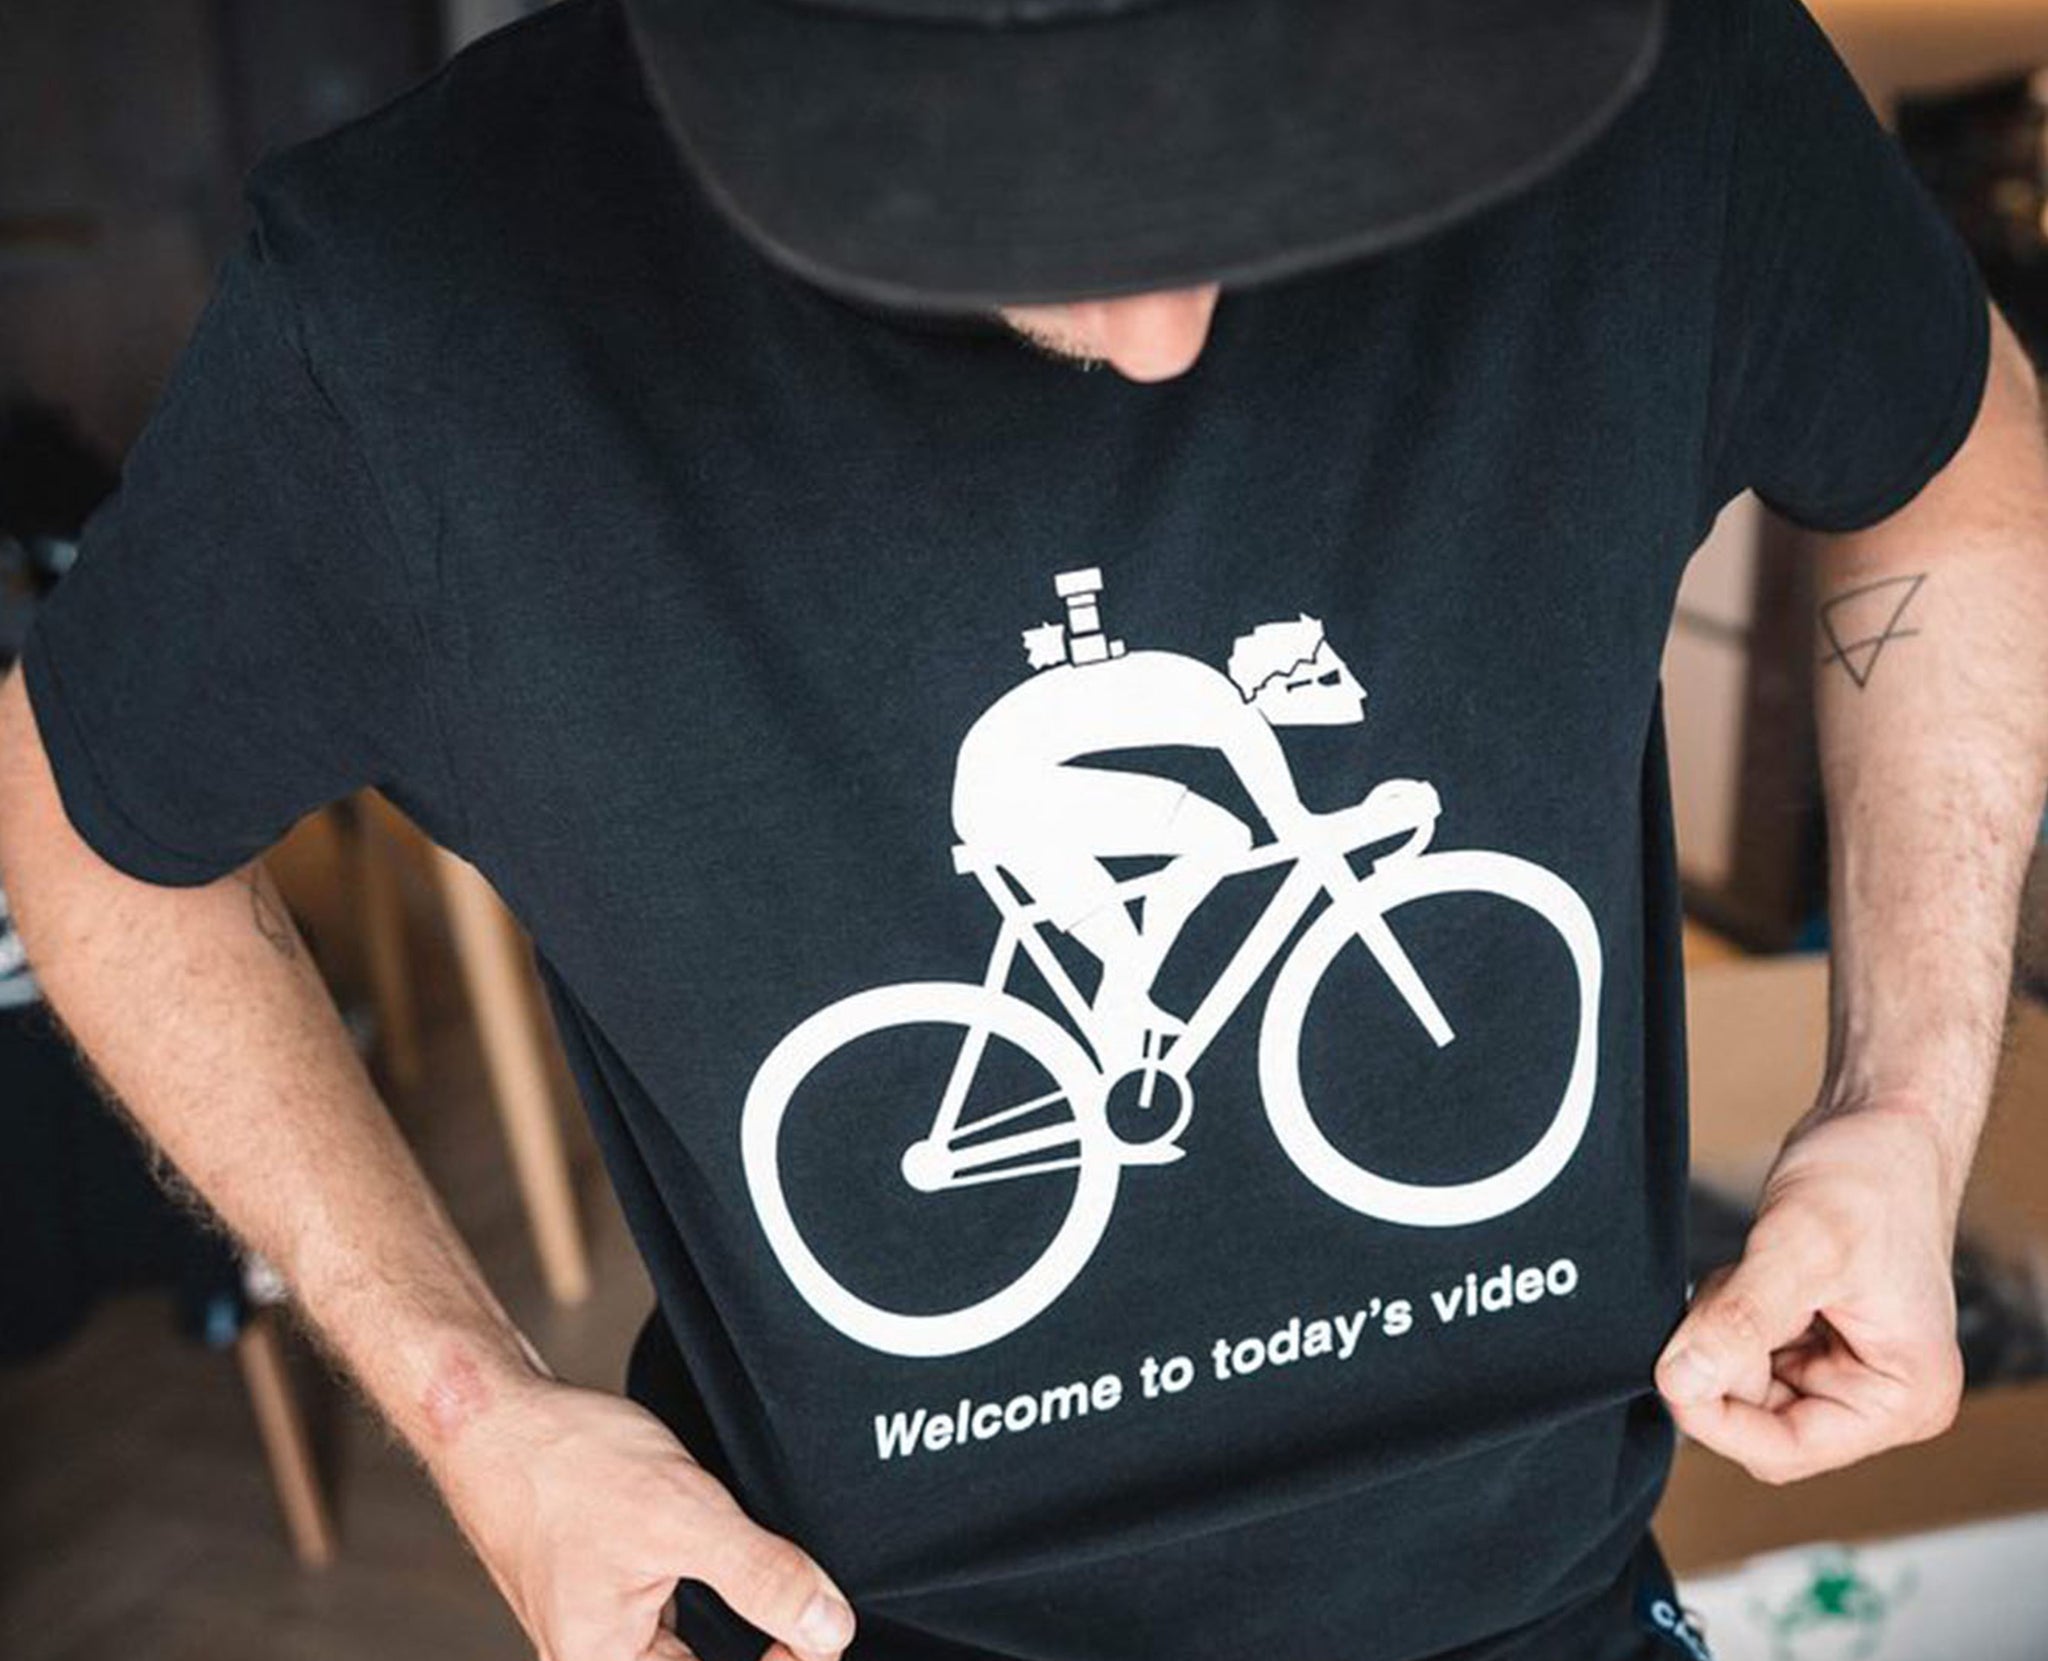 T-shirt showing cartoon cyclist with camera on his back saying "Welcome to todays video" by Francis CADE